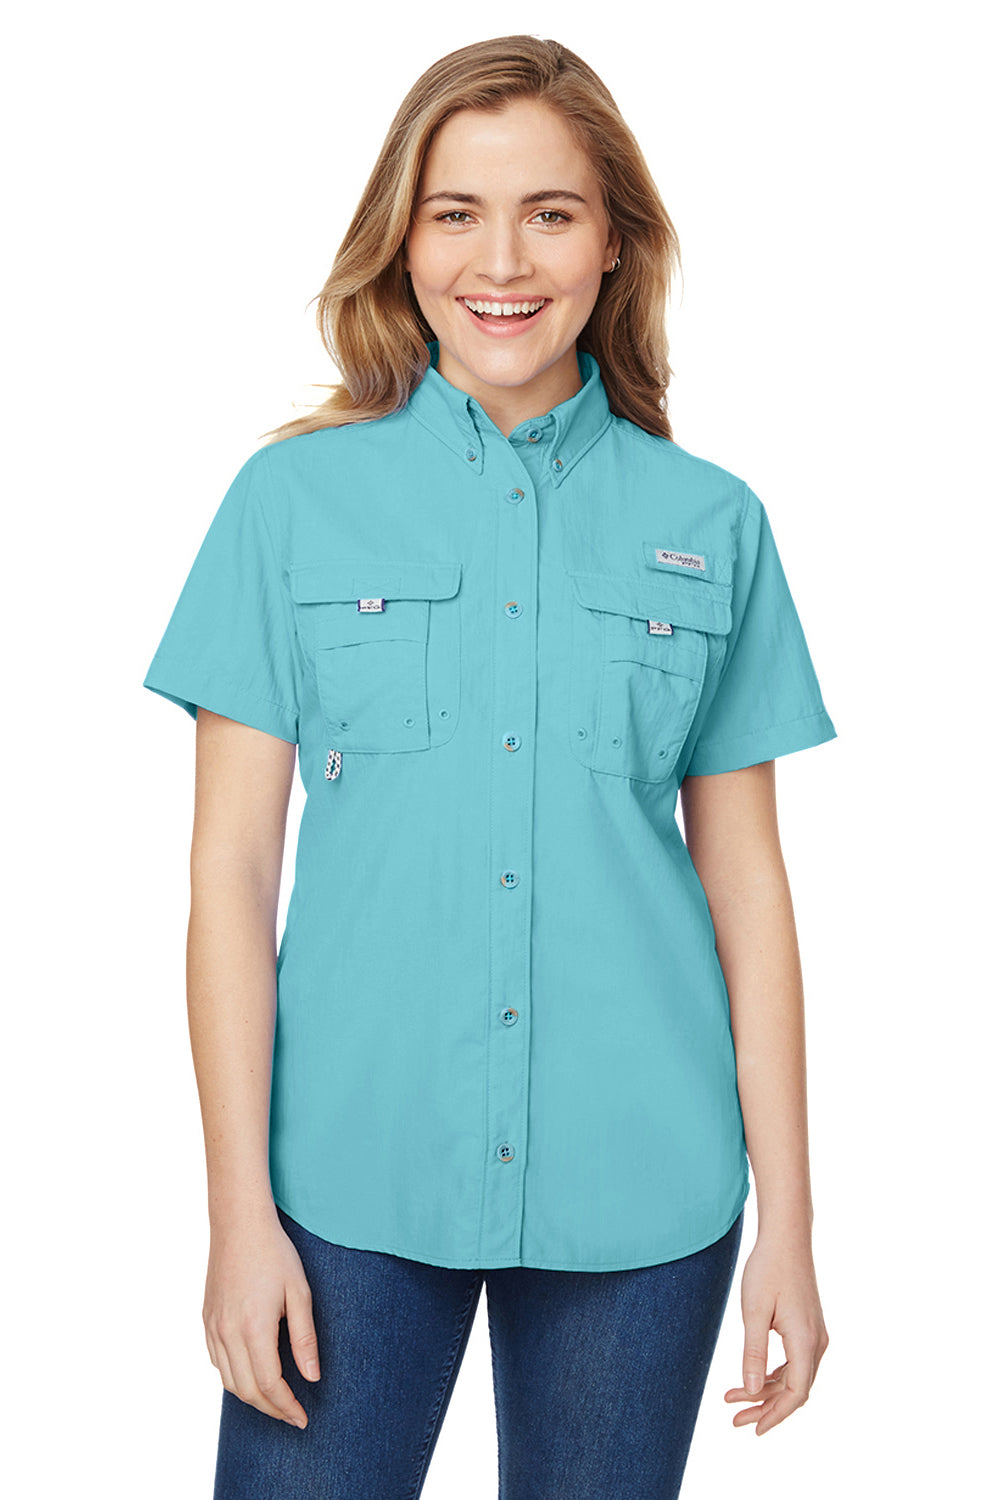 Columbia 7313 Womens Bahama Moisture Wicking Short Sleeve Button Down Shirt w/ Double Pockets Clear Blue Front